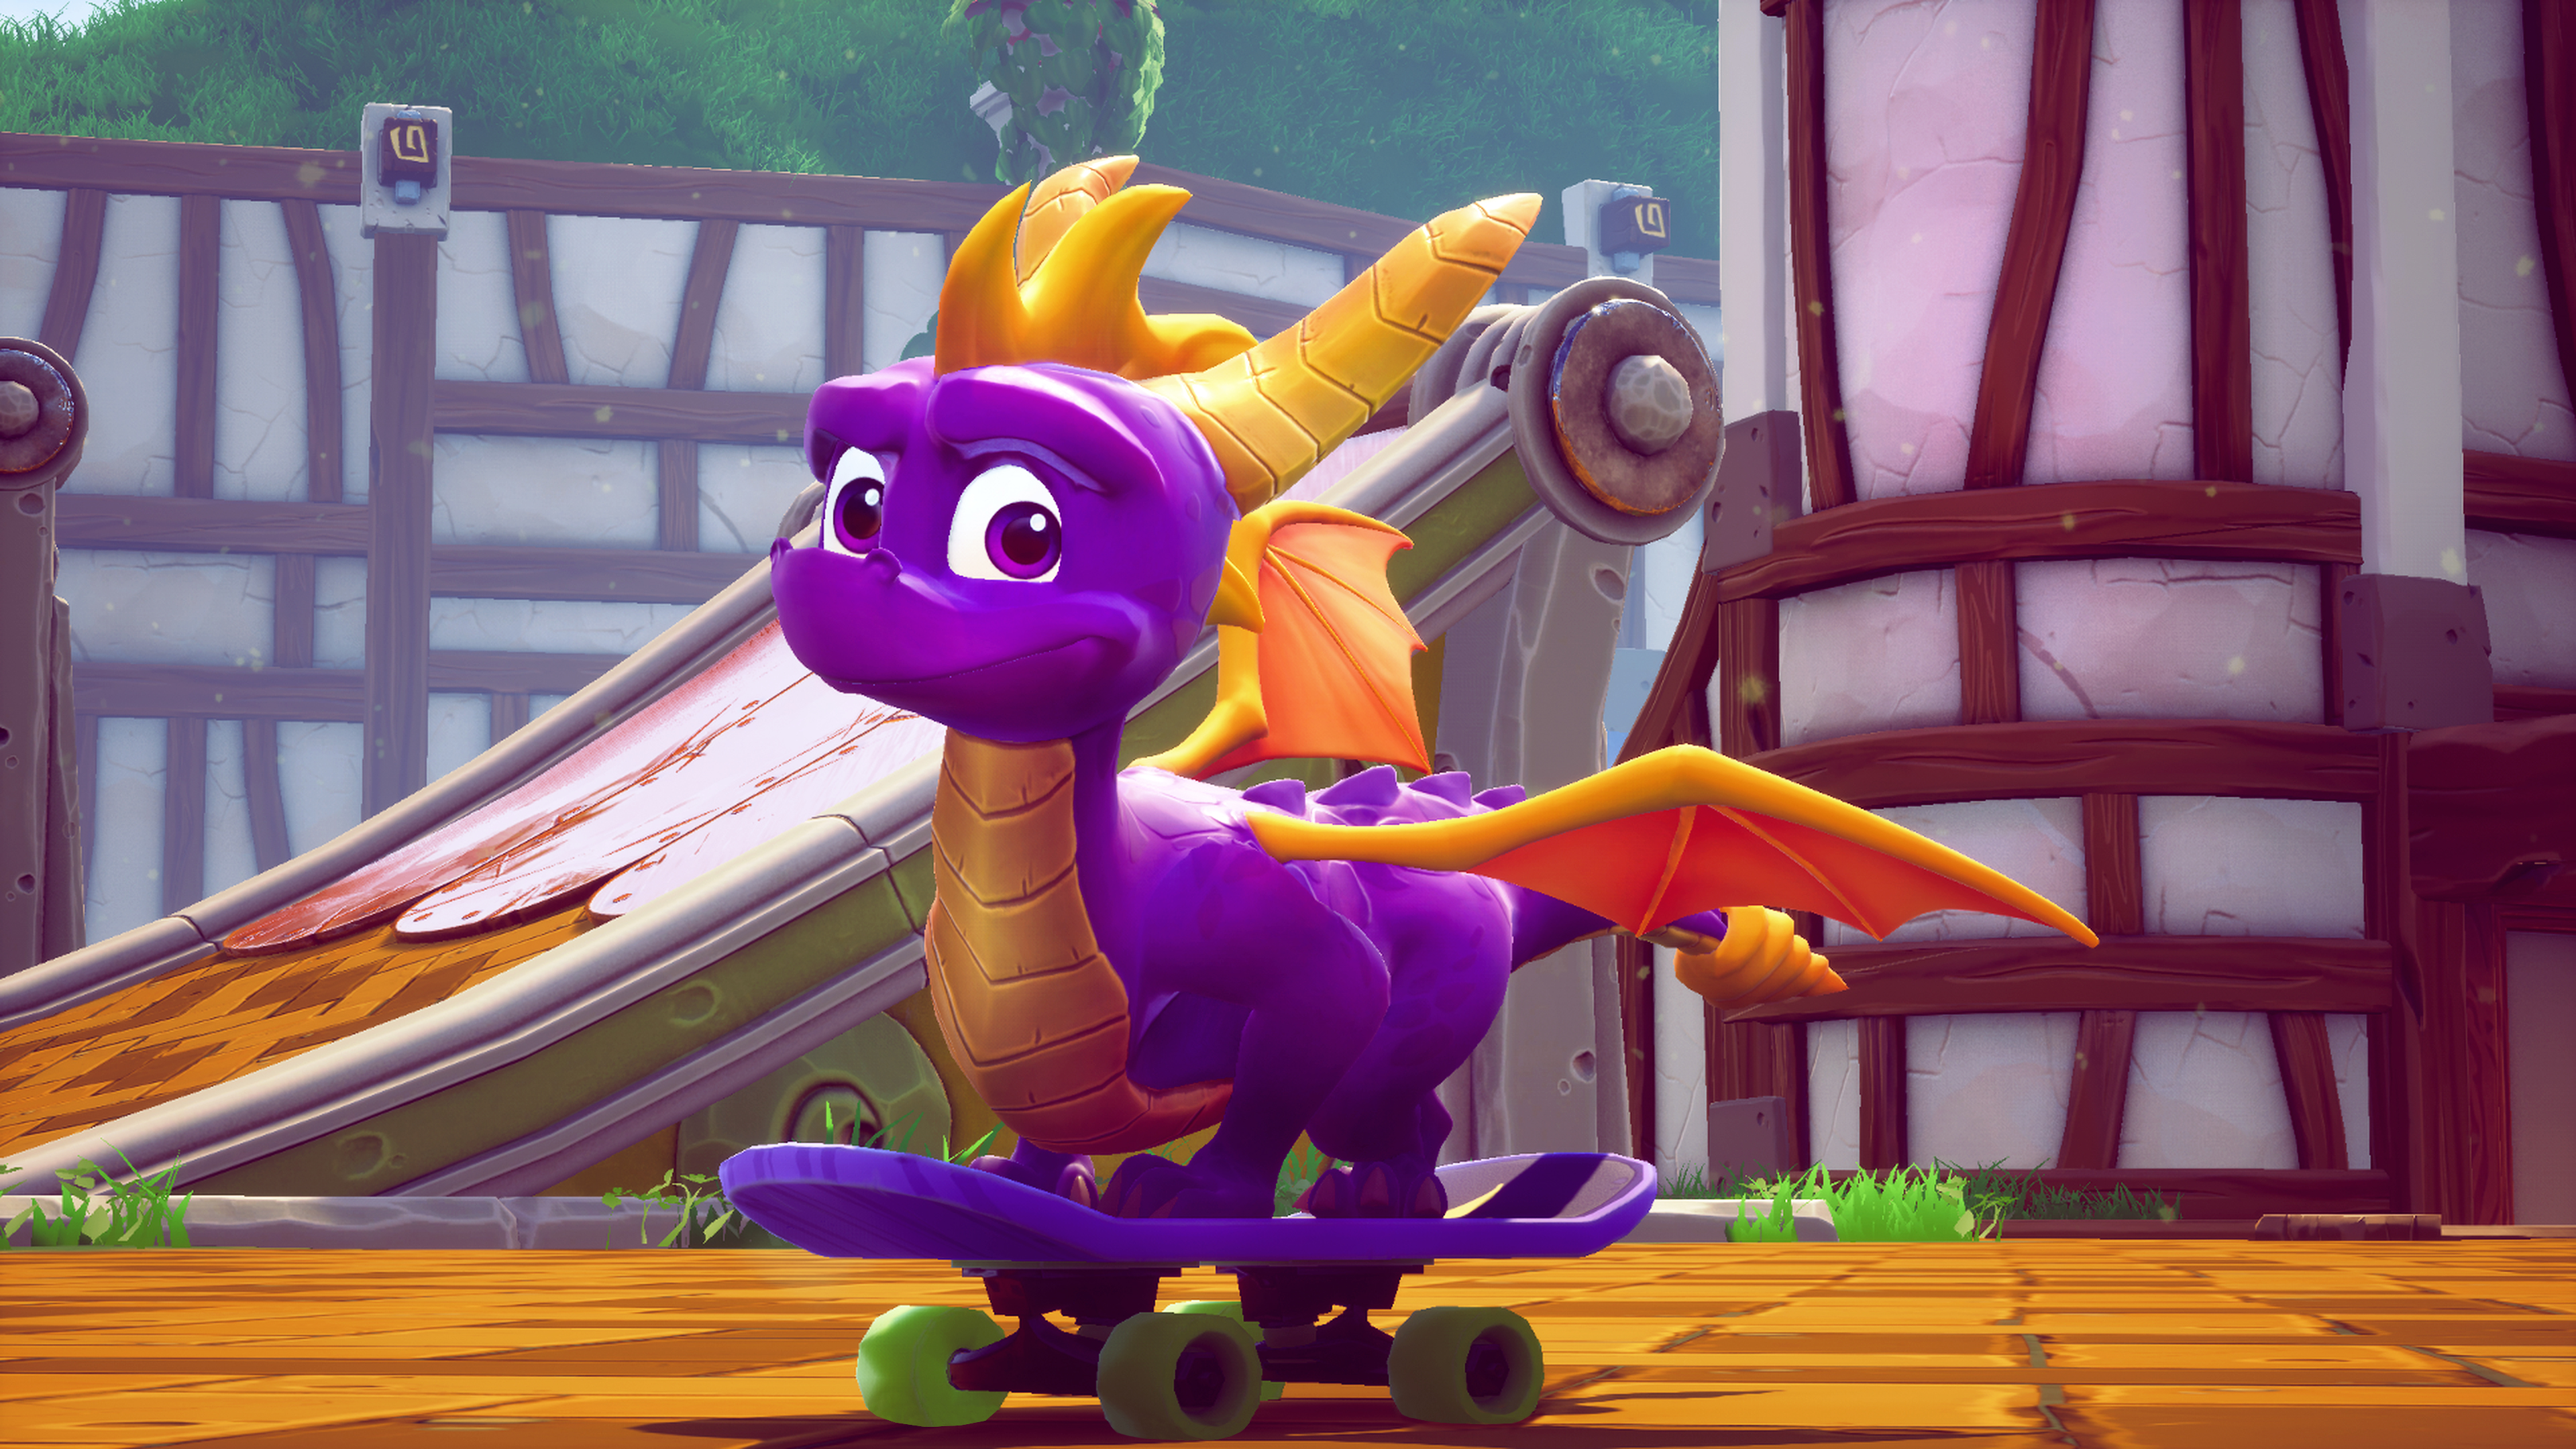 Spyro remake devs are officially "partnering with Xbox" on their next game, and the teaser already has fans convinced it's a new Spyro game